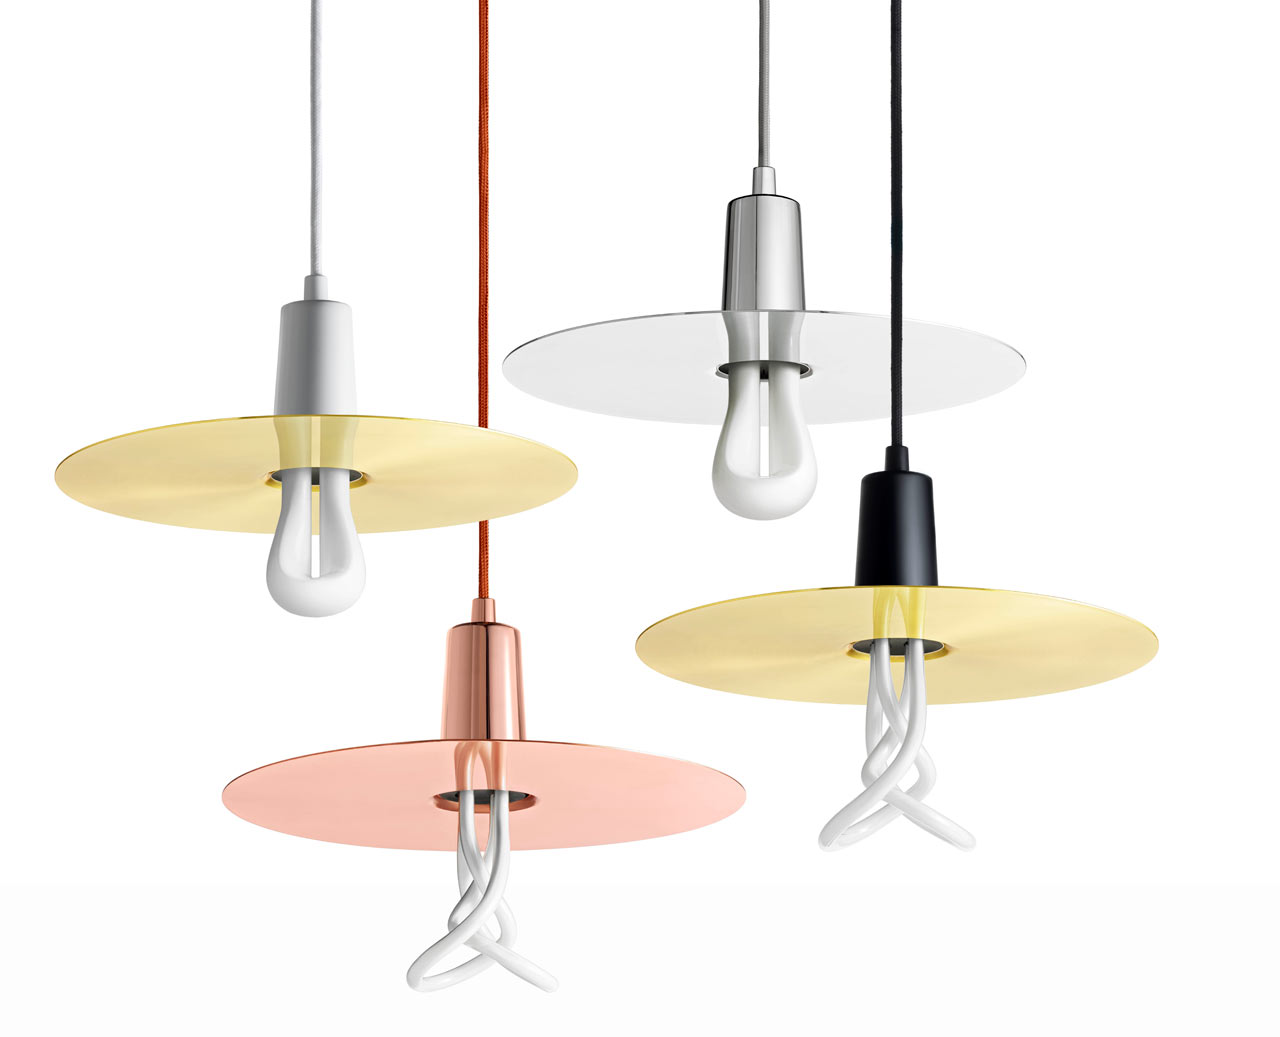 Plumen Launches the Drop Hat Shade